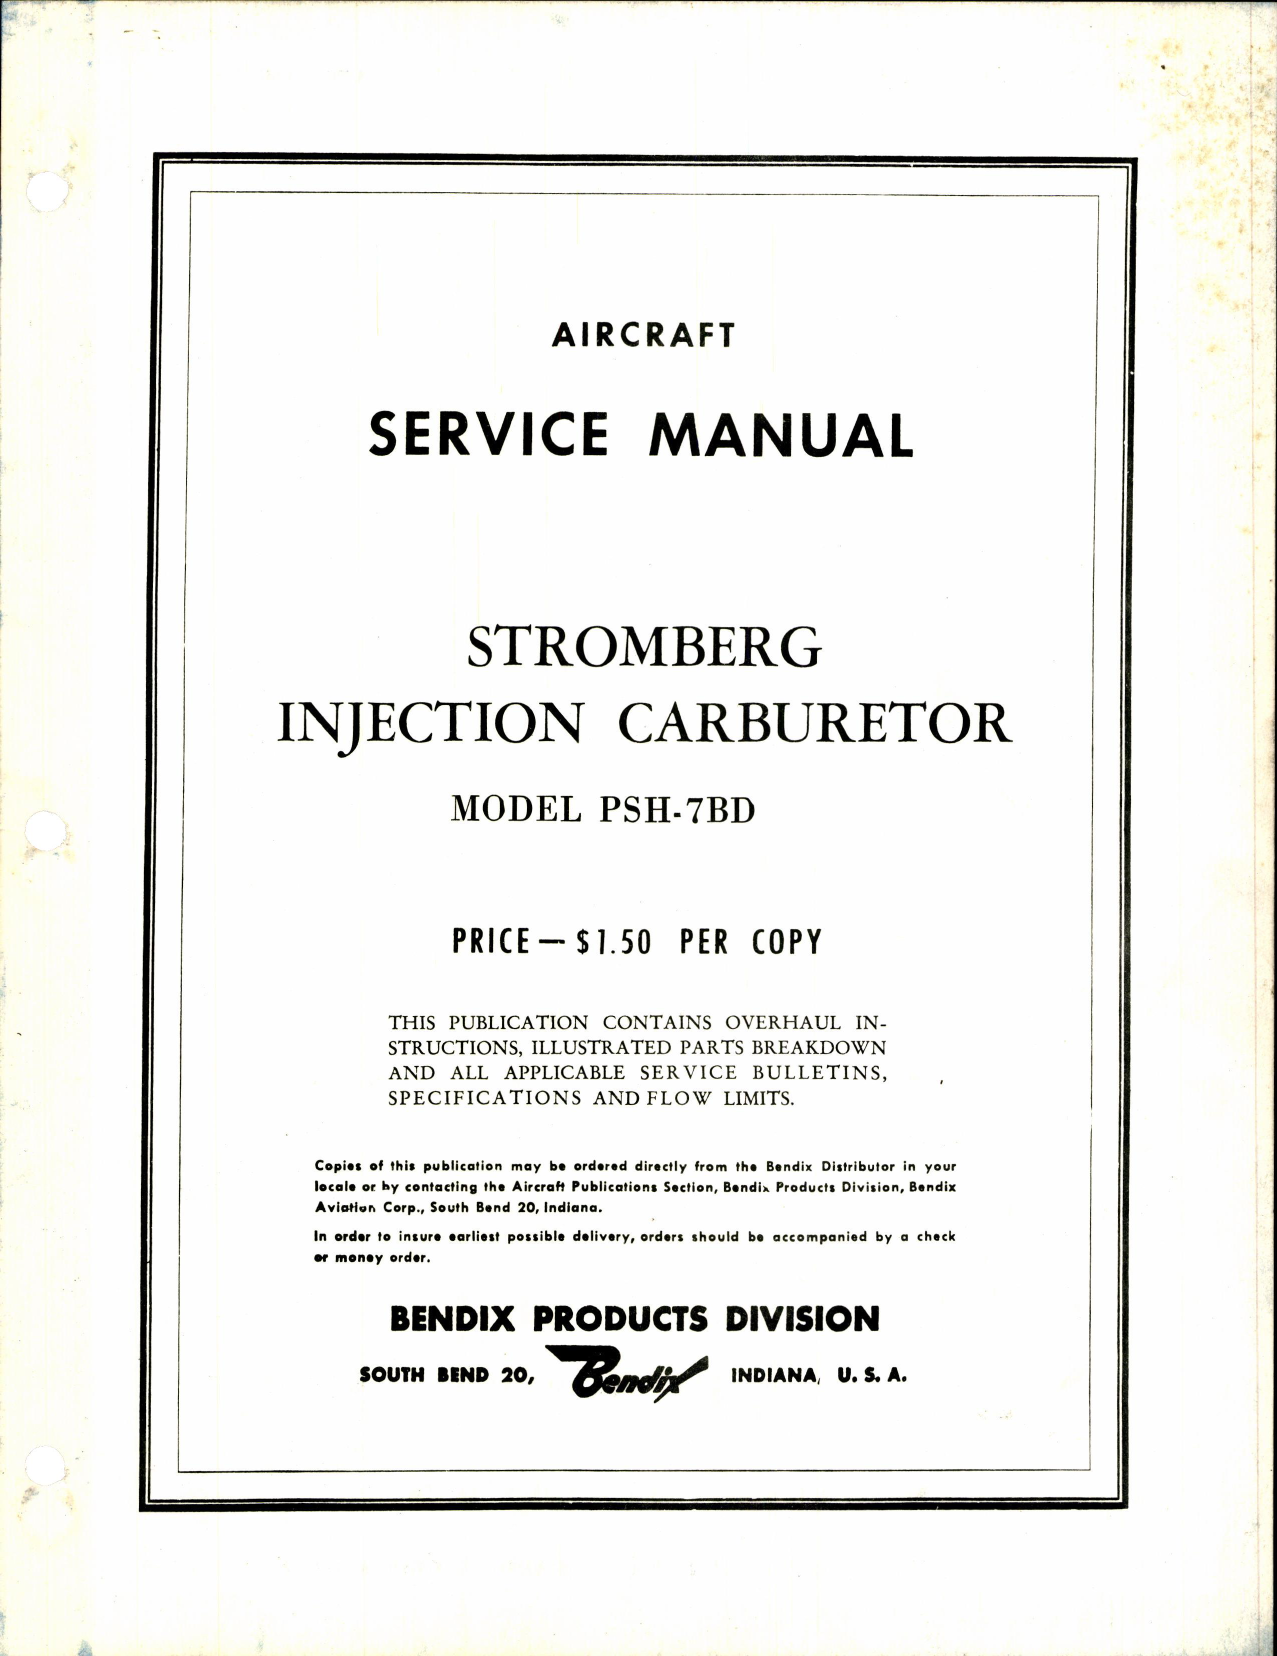 Sample page 1 from AirCorps Library document: Manual for Stromberg Injection Carburetor, PSH-7BD